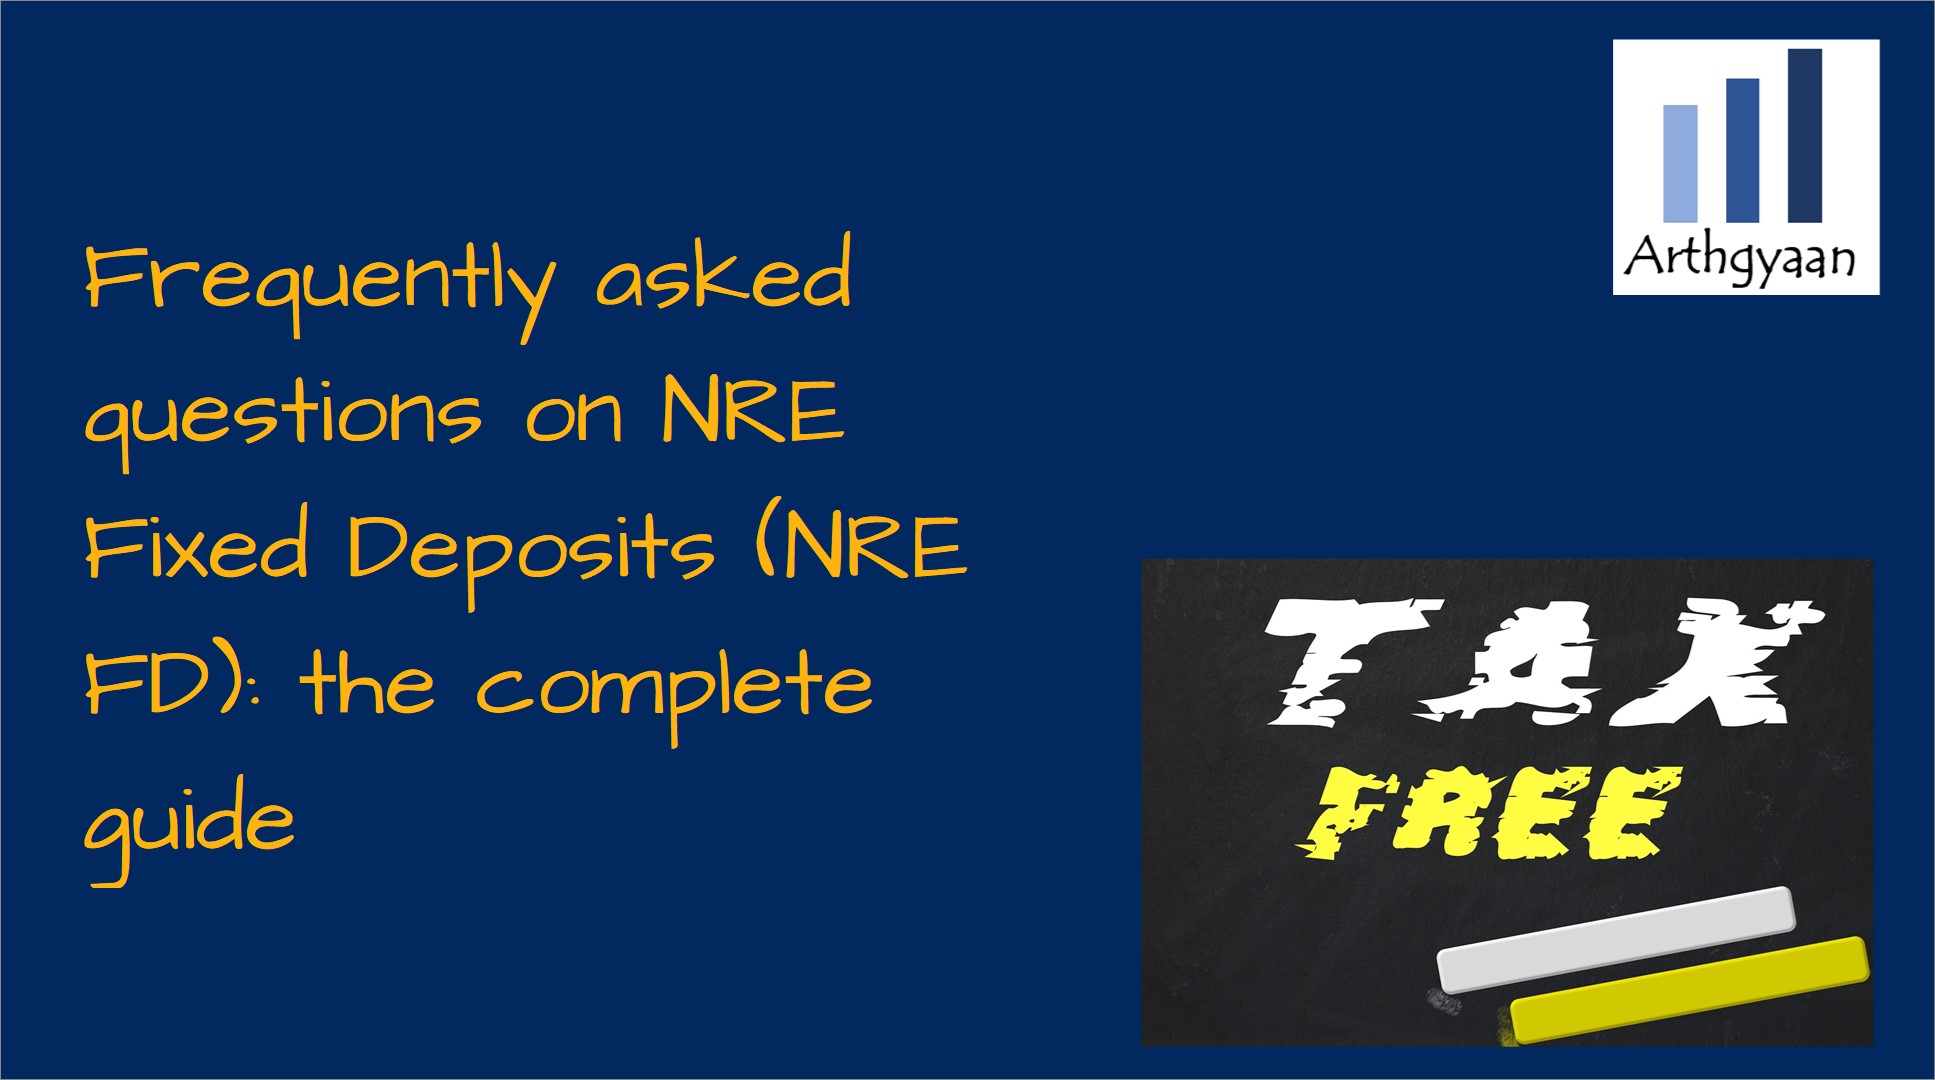 Frequently asked questions on NRE Fixed Deposits (NRE FD): the complete guide